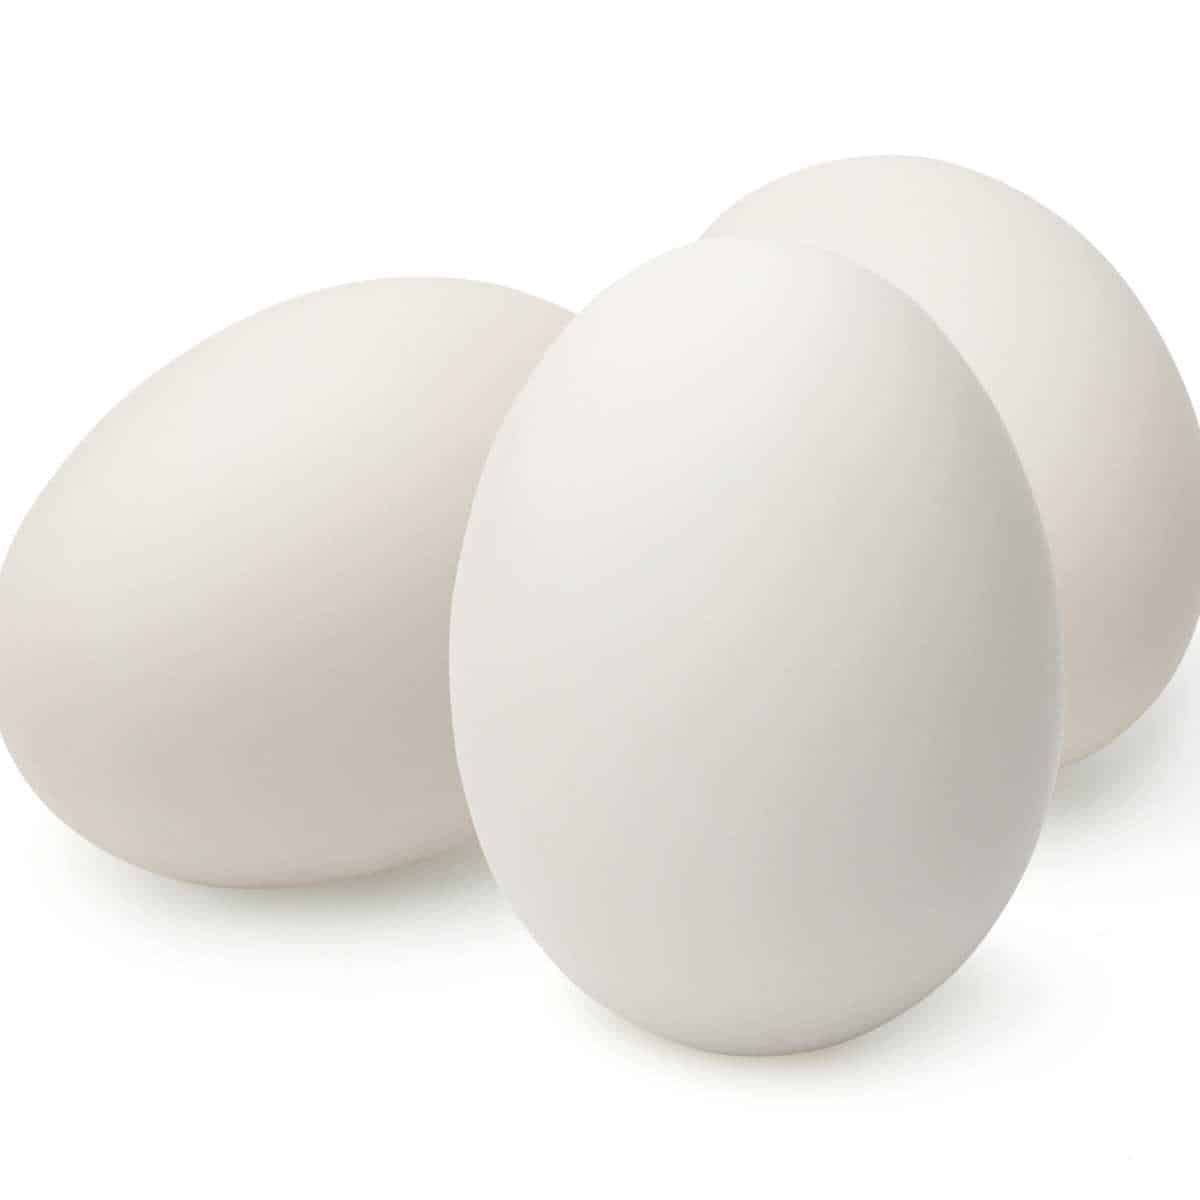 Three duck eggs on a white background.